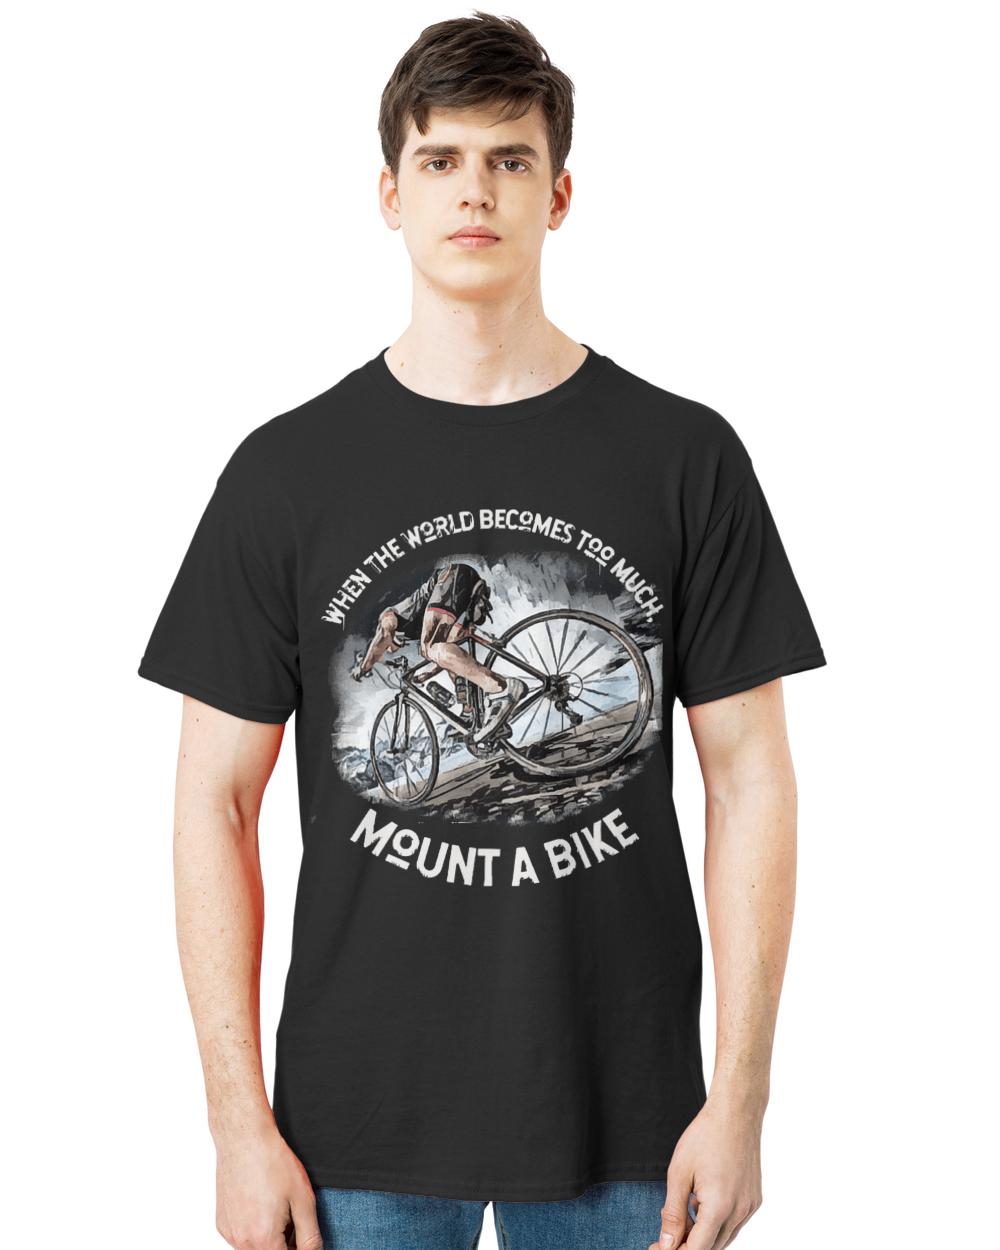 When The World Becomes Too Much Mount T- Shirt When the world becomes T O O M U C H, mount a bike! T- Shirt